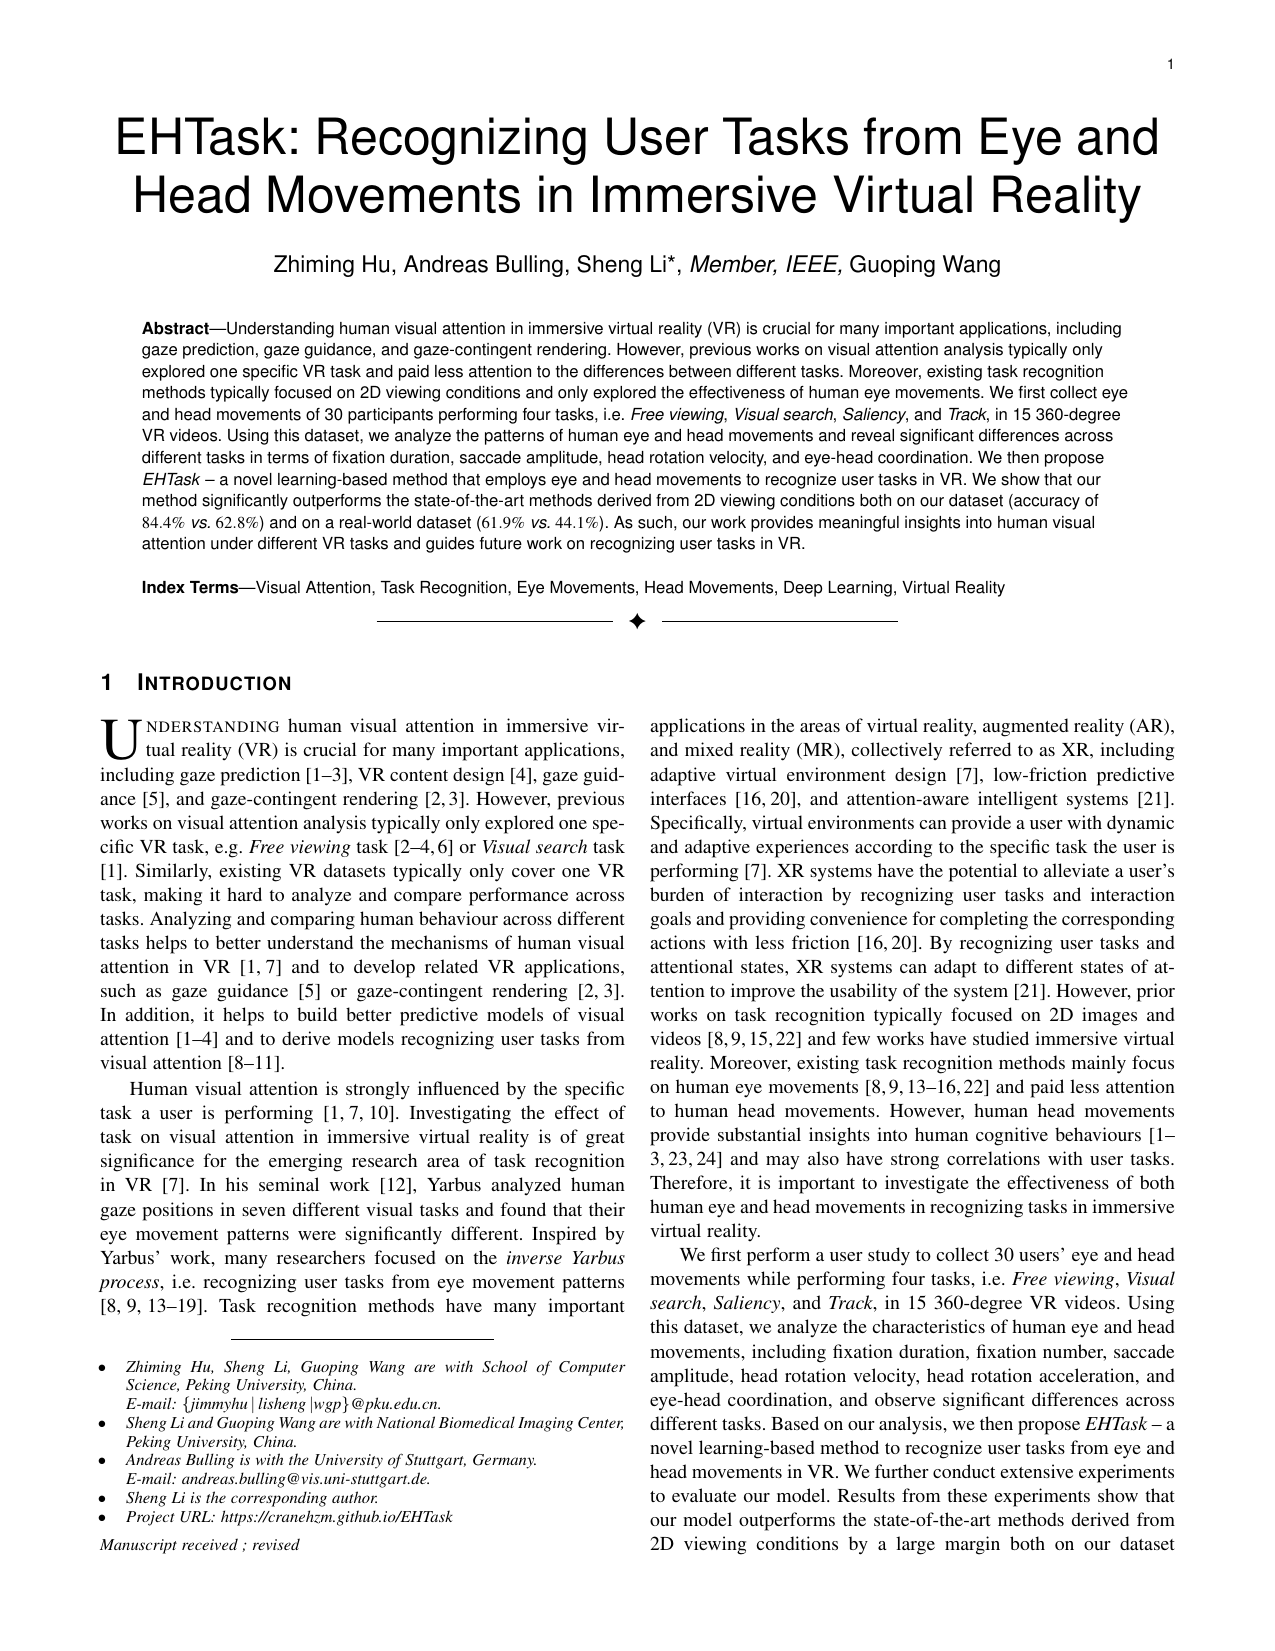 EHTask: Recognizing User Tasks from Eye and Head Movements in Immersive Virtual Reality